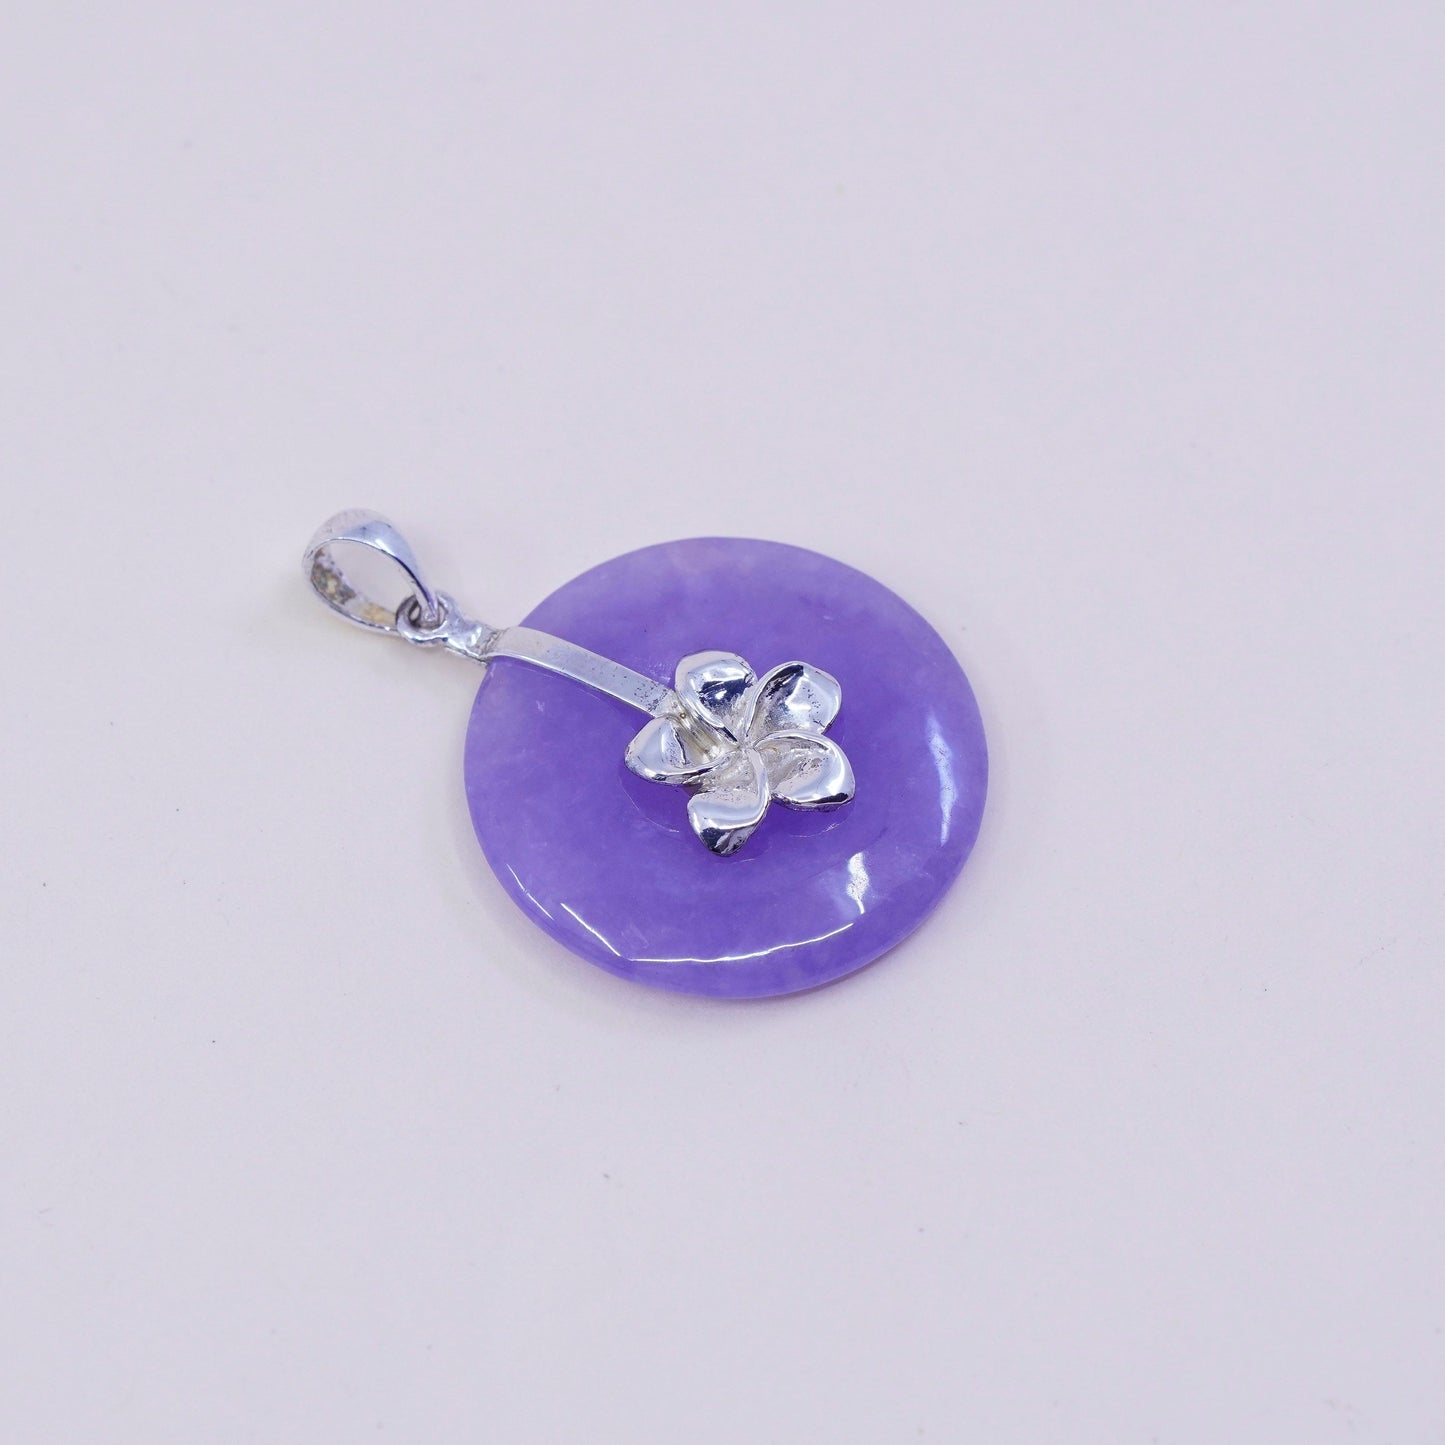 Vintage sterling 925 silver handmade pendant with purple jade and flower detail